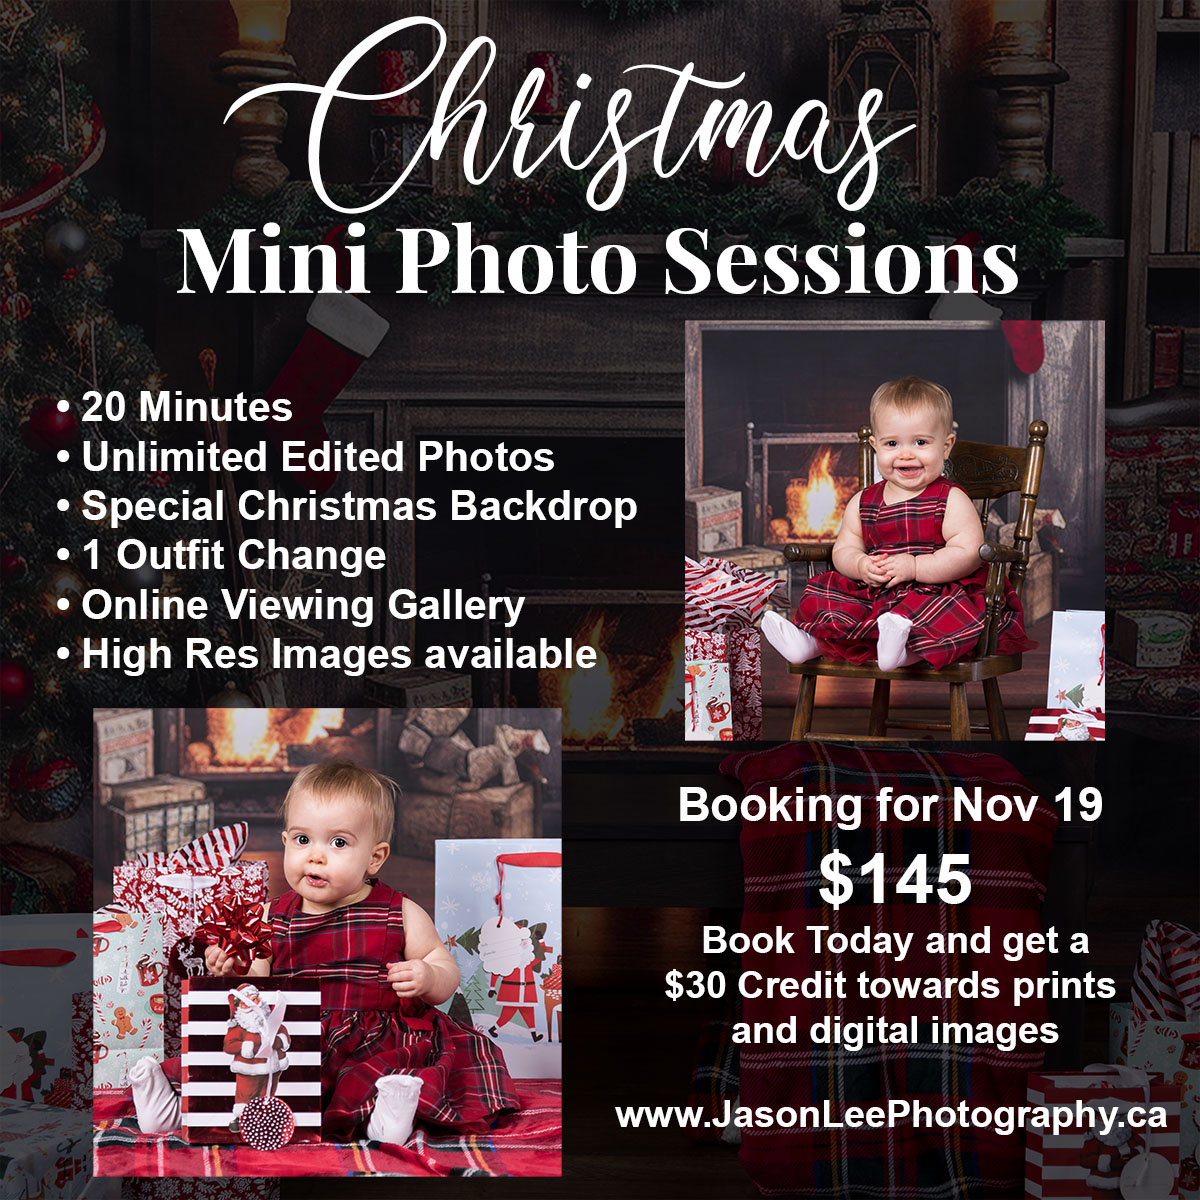 Book your Christmas Mini Photo Session today and get a $30 credit towards prints and digital images. jasonleephotography.ca/christmas-phot… #christmasminis #Winnipeg